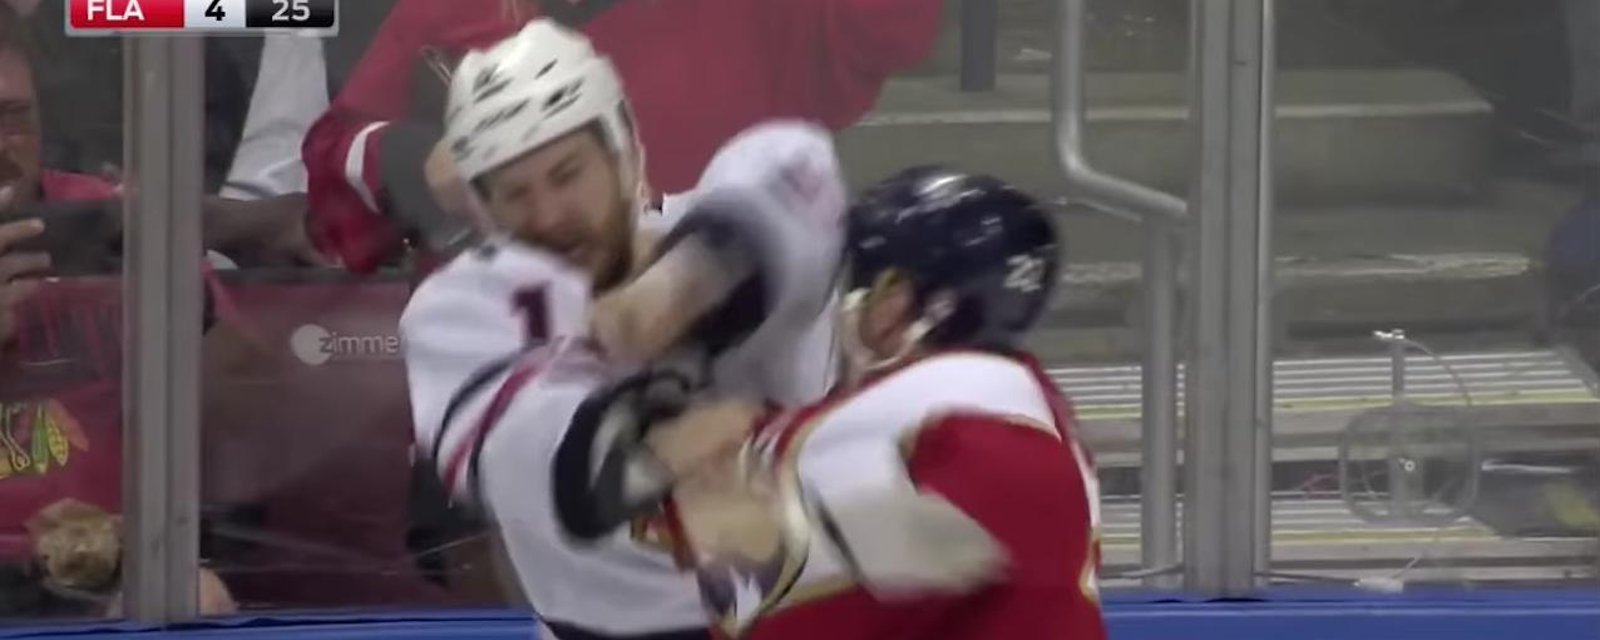 Chaos, two fights erupt late in third period during blowout game! 